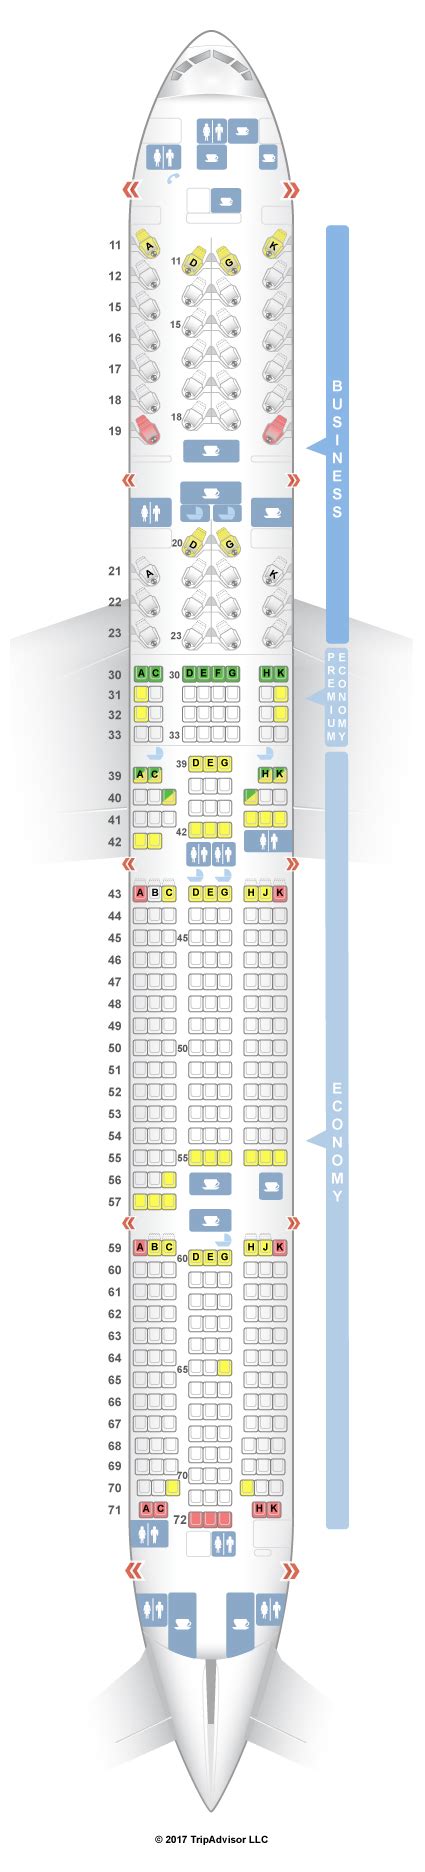 Cathay Pacific Boeing Er Jet Seating Plan Tutorial Pics Hot Sex Picture